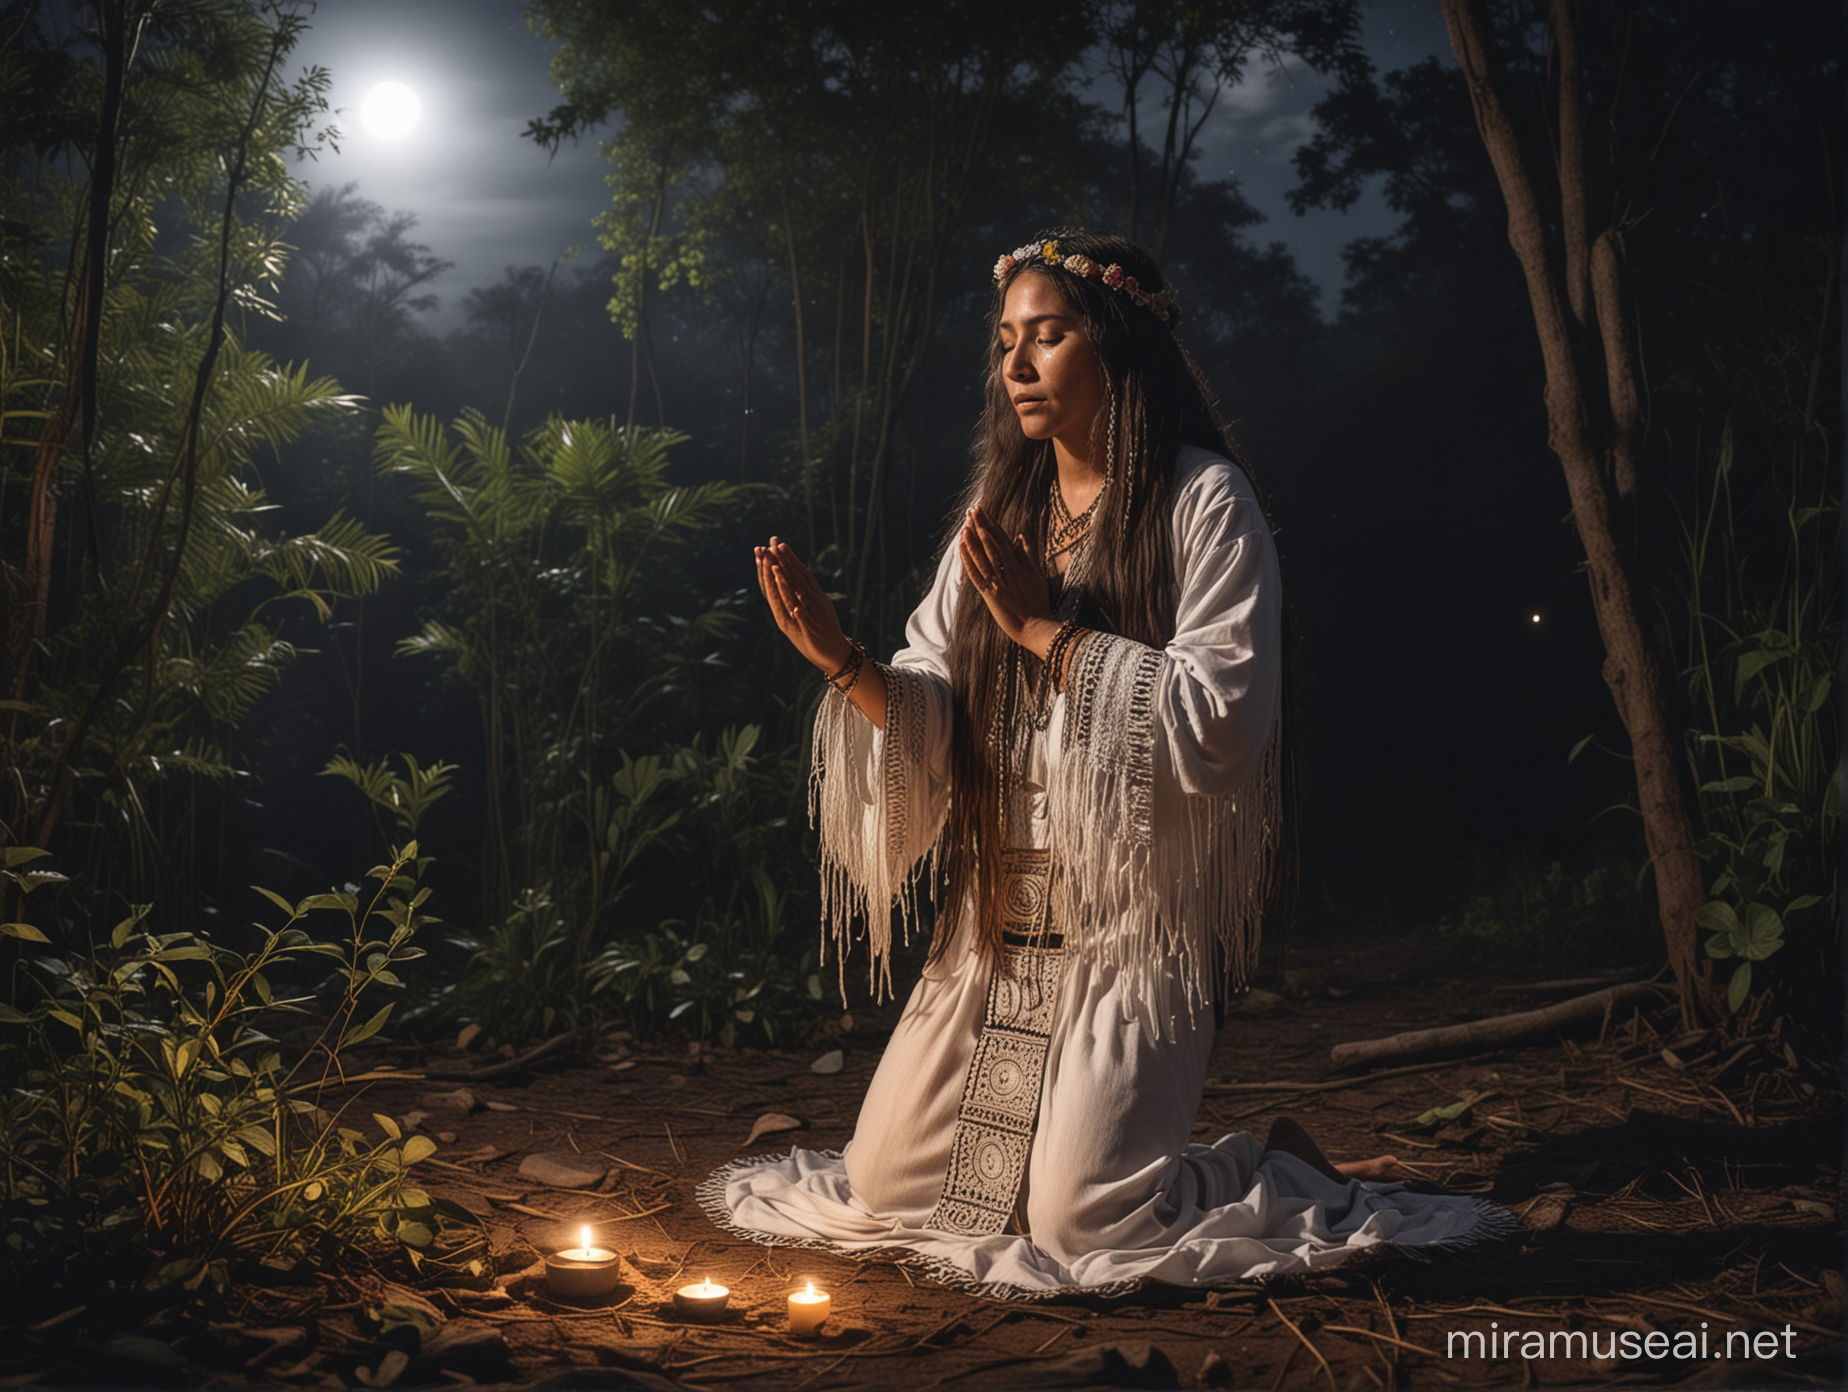 Mexican Shaman Woman Performing Moonlit Jungle Ceremony